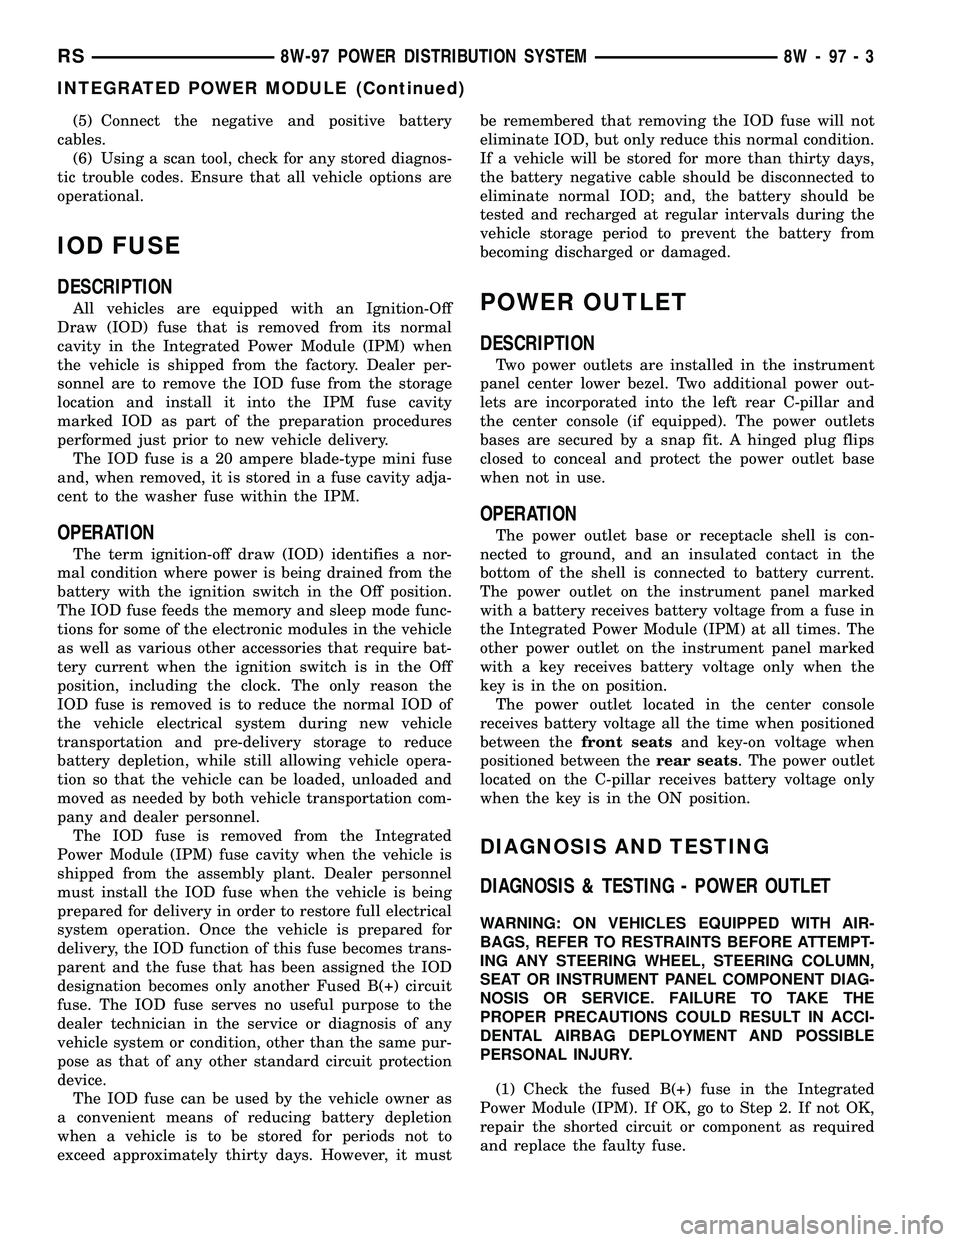 CHRYSLER VOYAGER 2005  Service Manual (5) Connect the negative and positive battery
cables.
(6) Using a scan tool, check for any stored diagnos-
tic trouble codes. Ensure that all vehicle options are
operational.
IOD FUSE
DESCRIPTION
All 